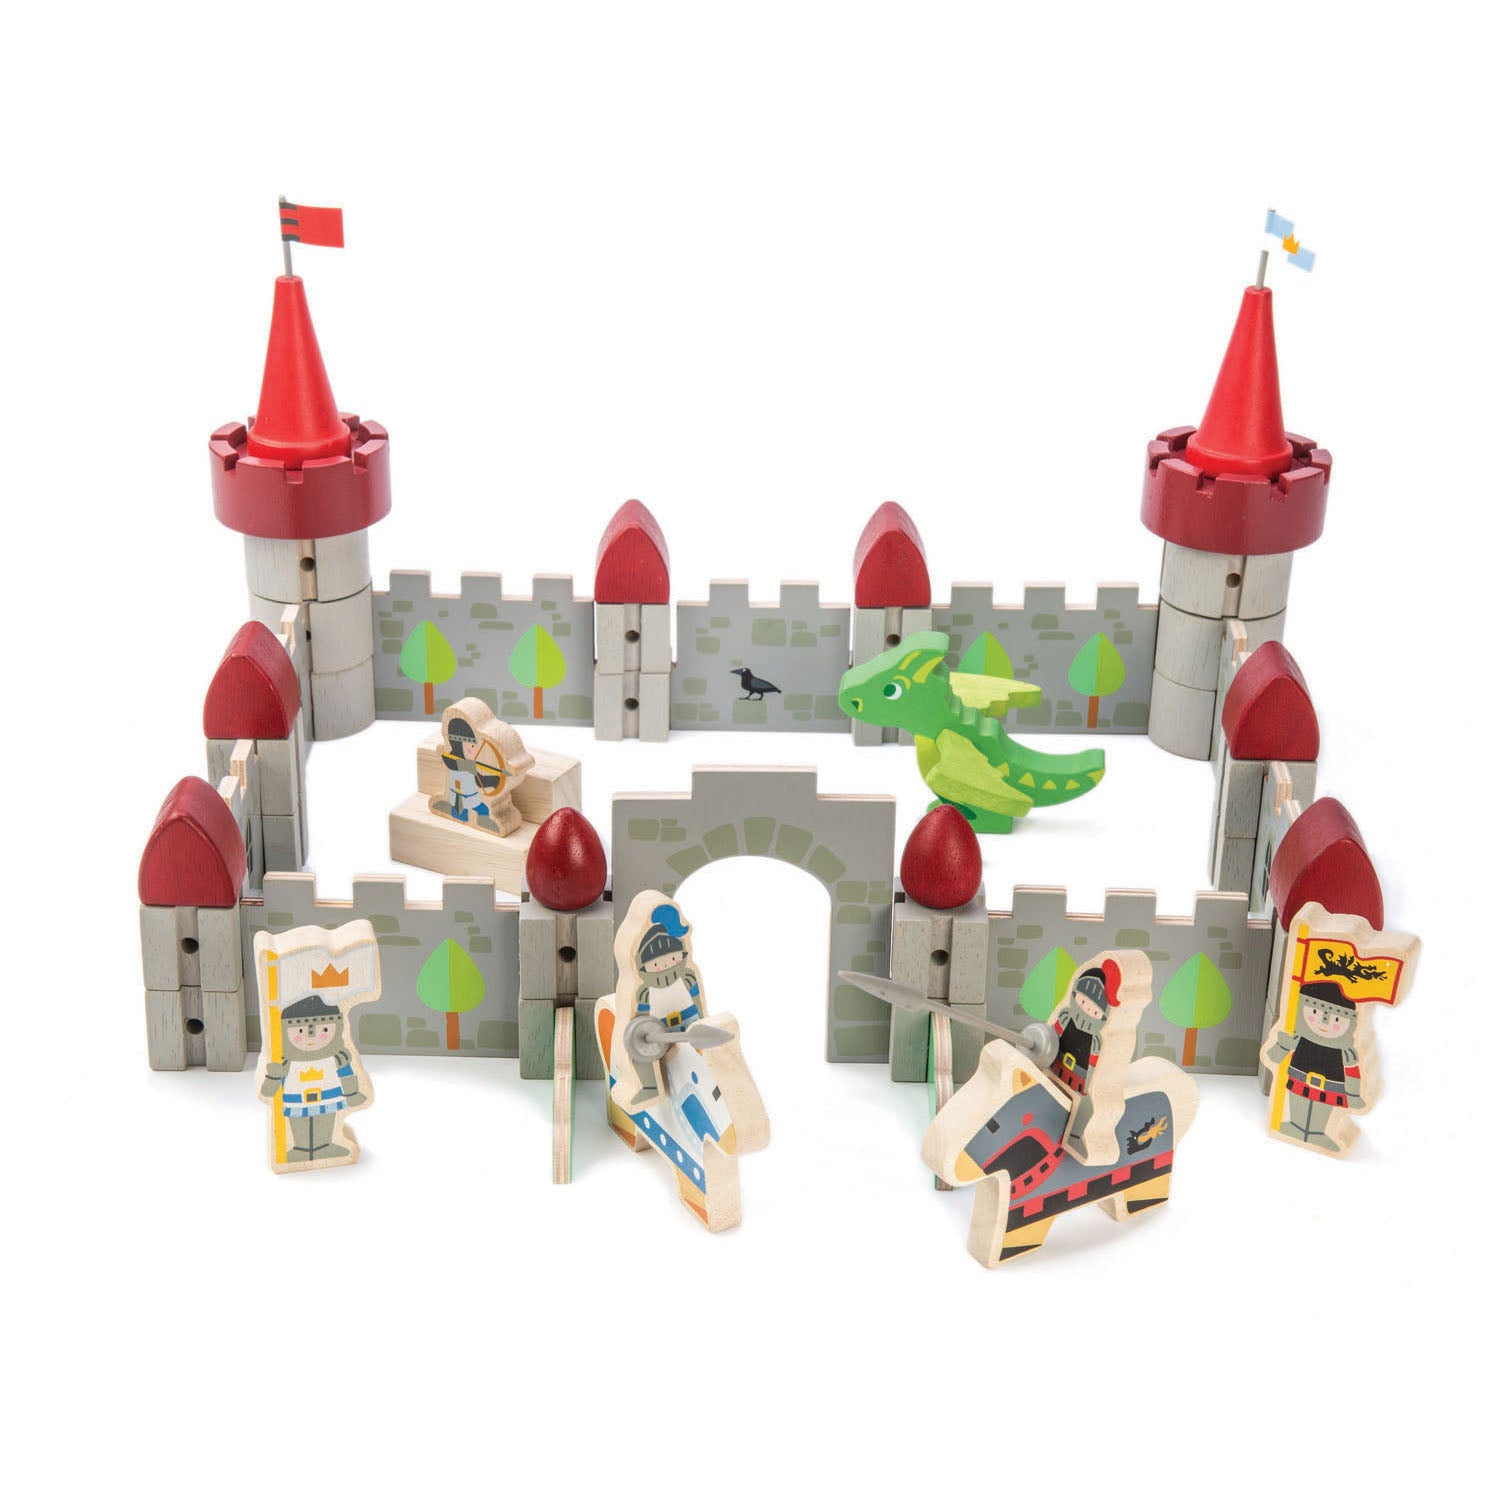 <p>Create your fantasy world with our Dragon Castle. Set features red and blue soldiers with different postures, horses to sit on, spears, one archway, hedges and a baby dragon. </p>
<p>This medium size set has all you need to create and build your own unique castle layout, by clipping together walls and posts with small neat plastic pegs.</p>
<p>Perfect to play against or add to our Wolf Castle. </p>
<p><strong>Recommended</strong>by Good Toy Guide**</p>
<p>Age range: 3 Years And Older  </p>
<p>Product size: 16.93&quot; x 14.02&quot; x 8.54&quot;  </p>
<p>Weight: 2.53 lbs</p>
